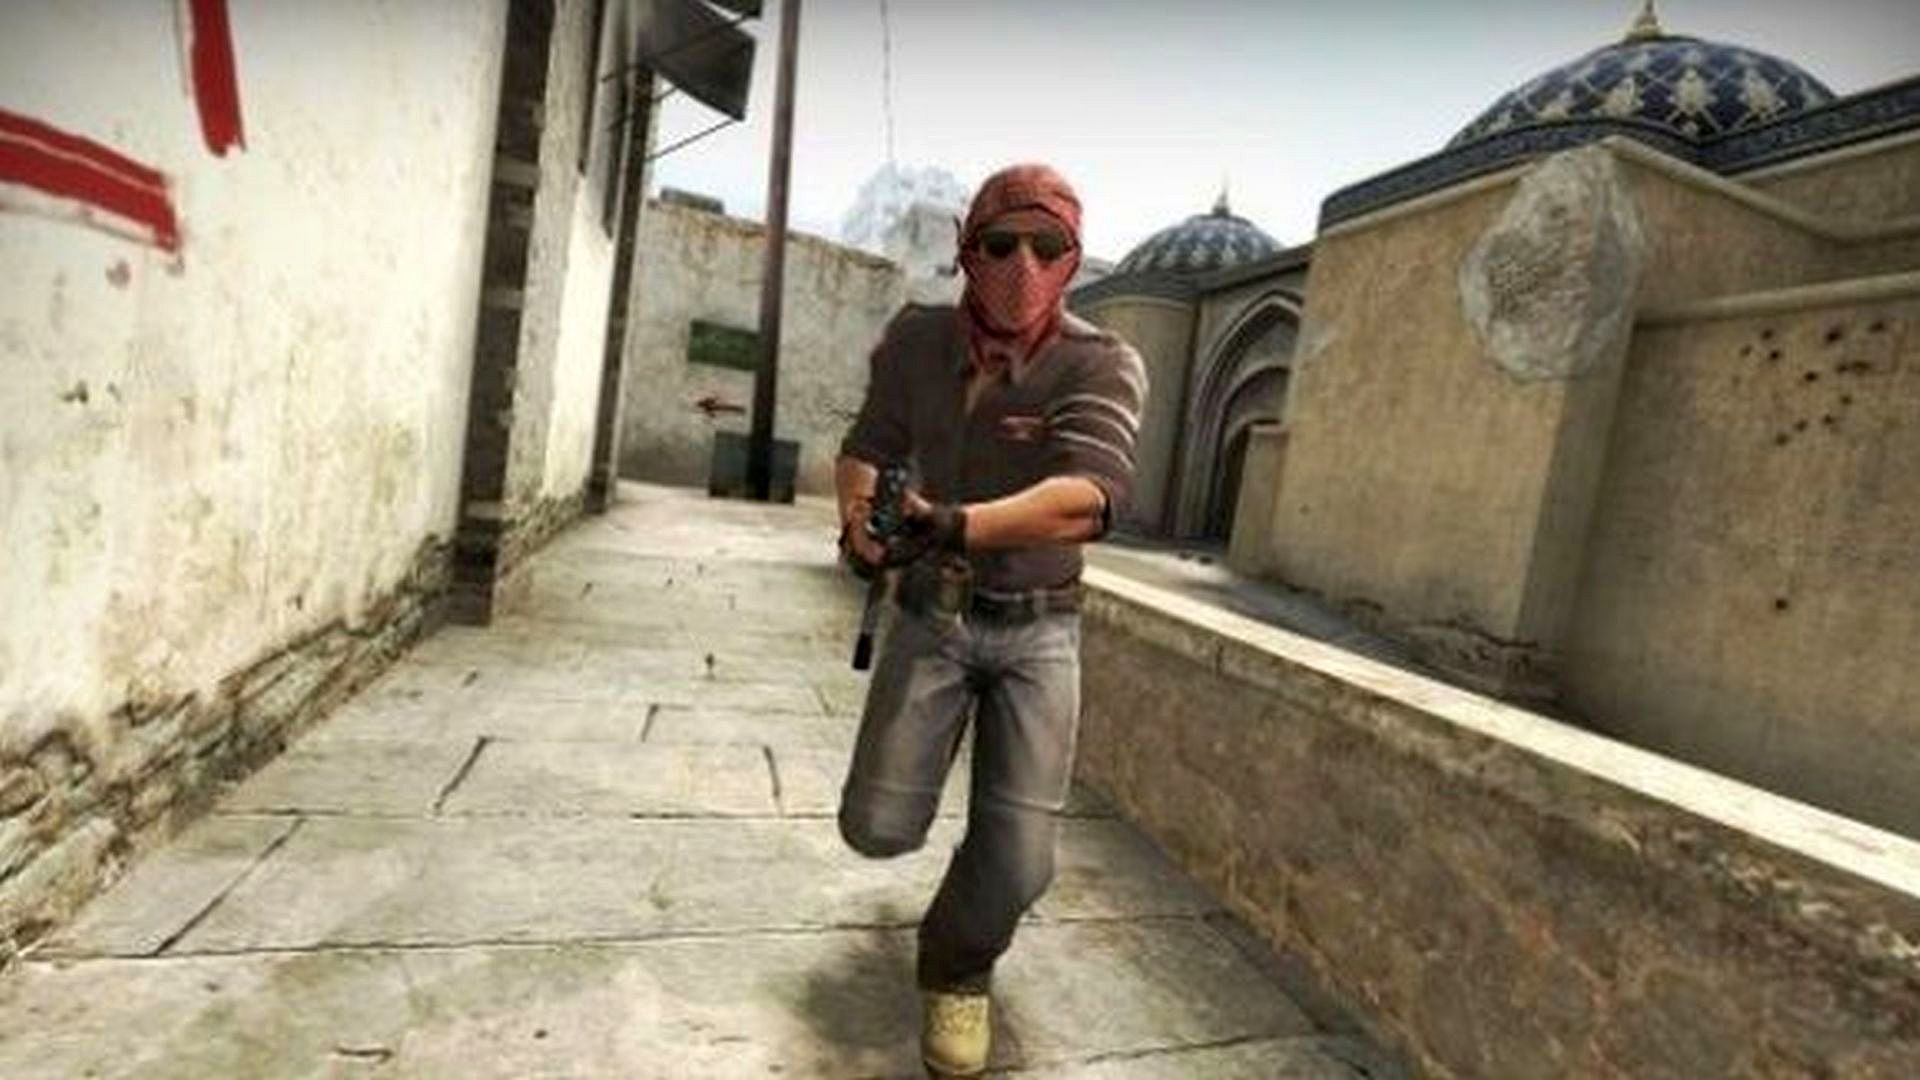 CS:GO fan creates “Mirage story mode” with mission, secrets, and extended map